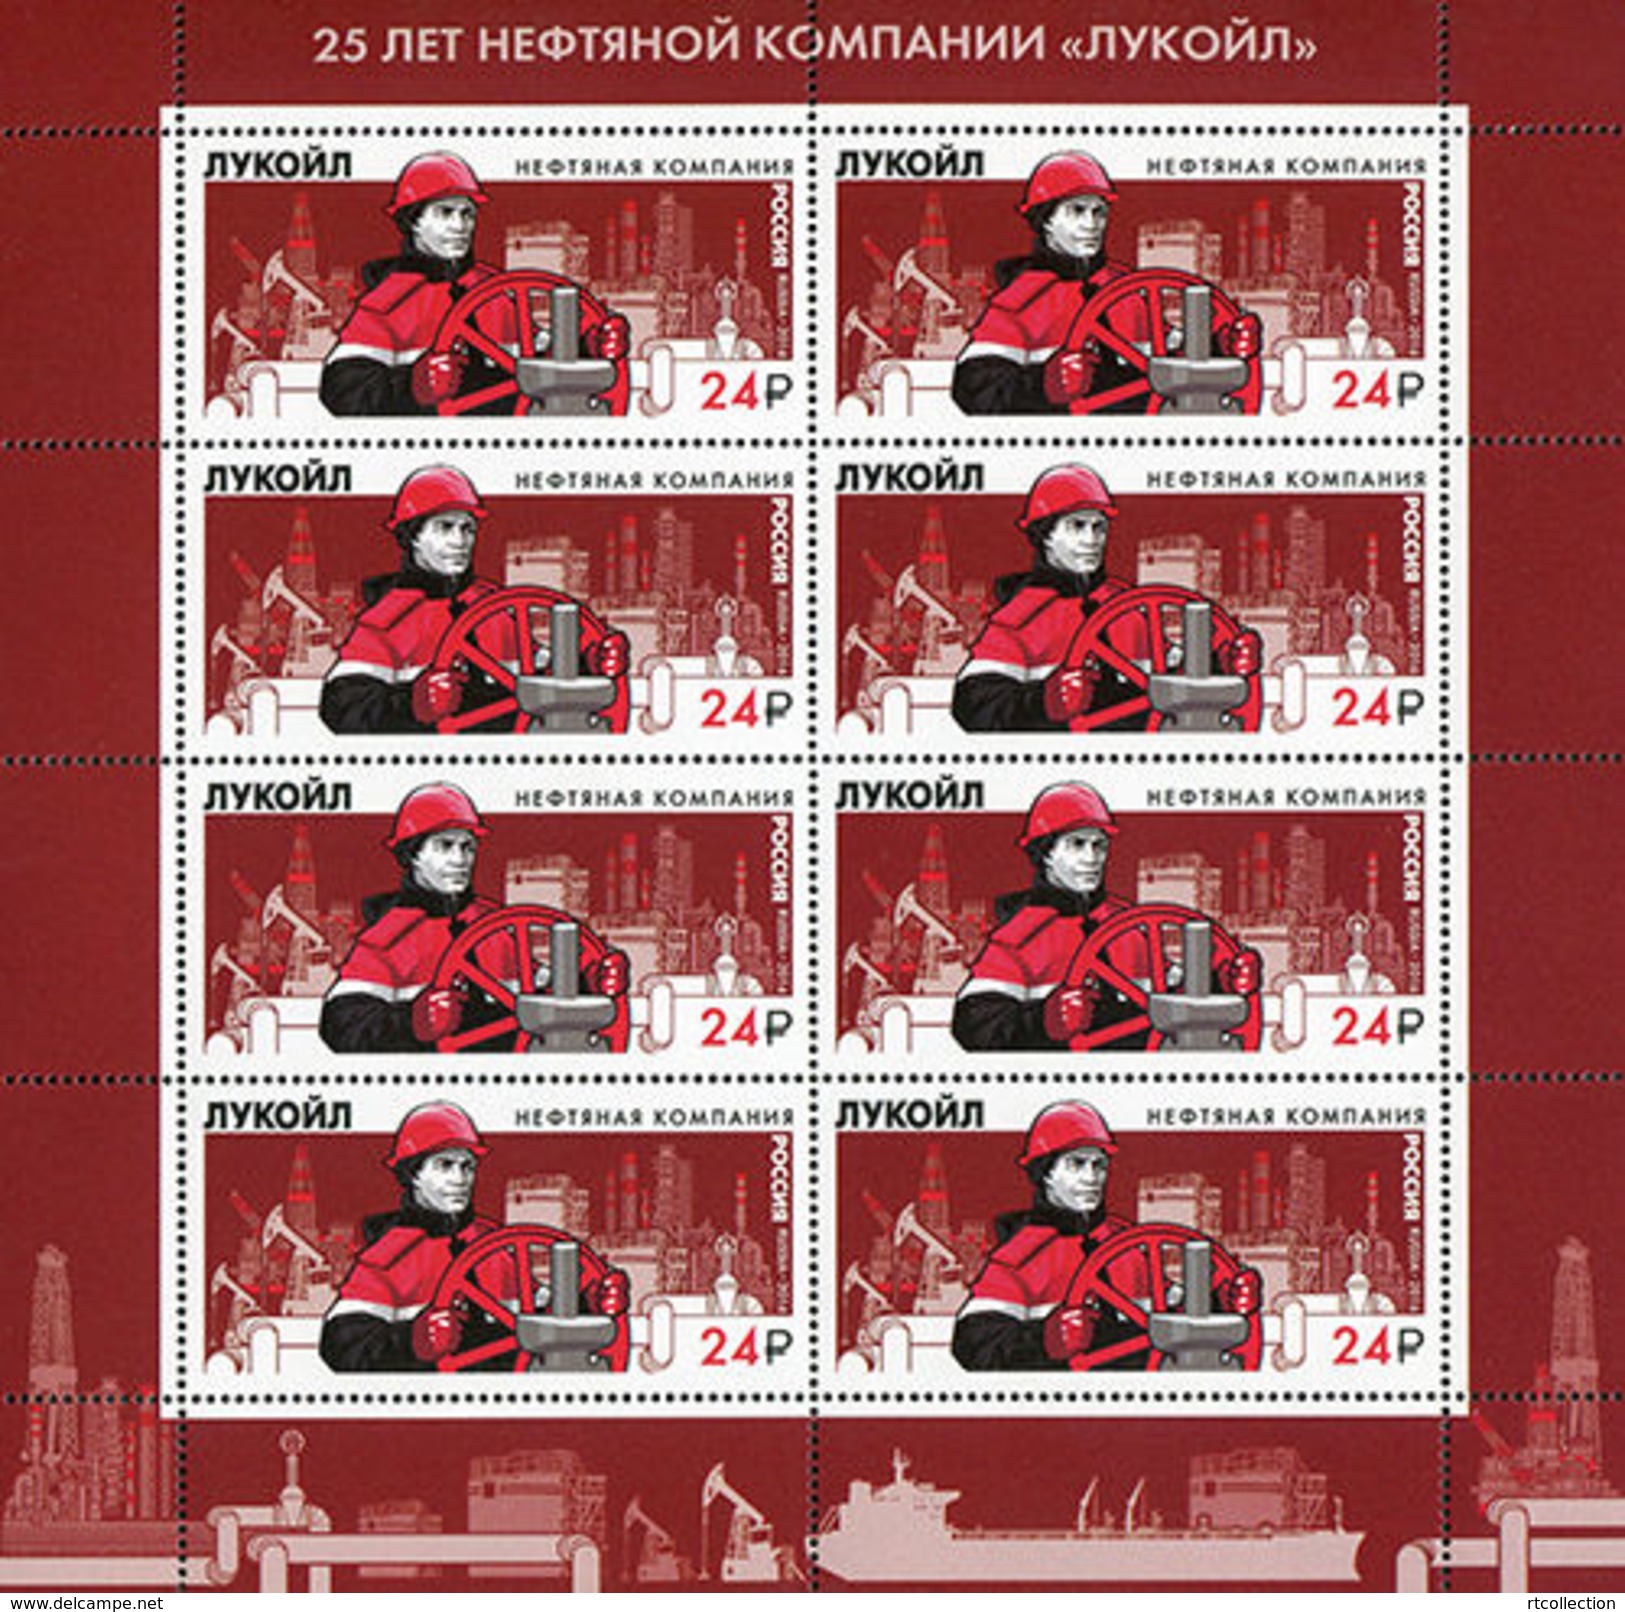 Russia 2016 Sheet Oil Company Lukoil Mining Trade Industry Organizations People Stamps Michel KLB 2355 - Feuilles Complètes